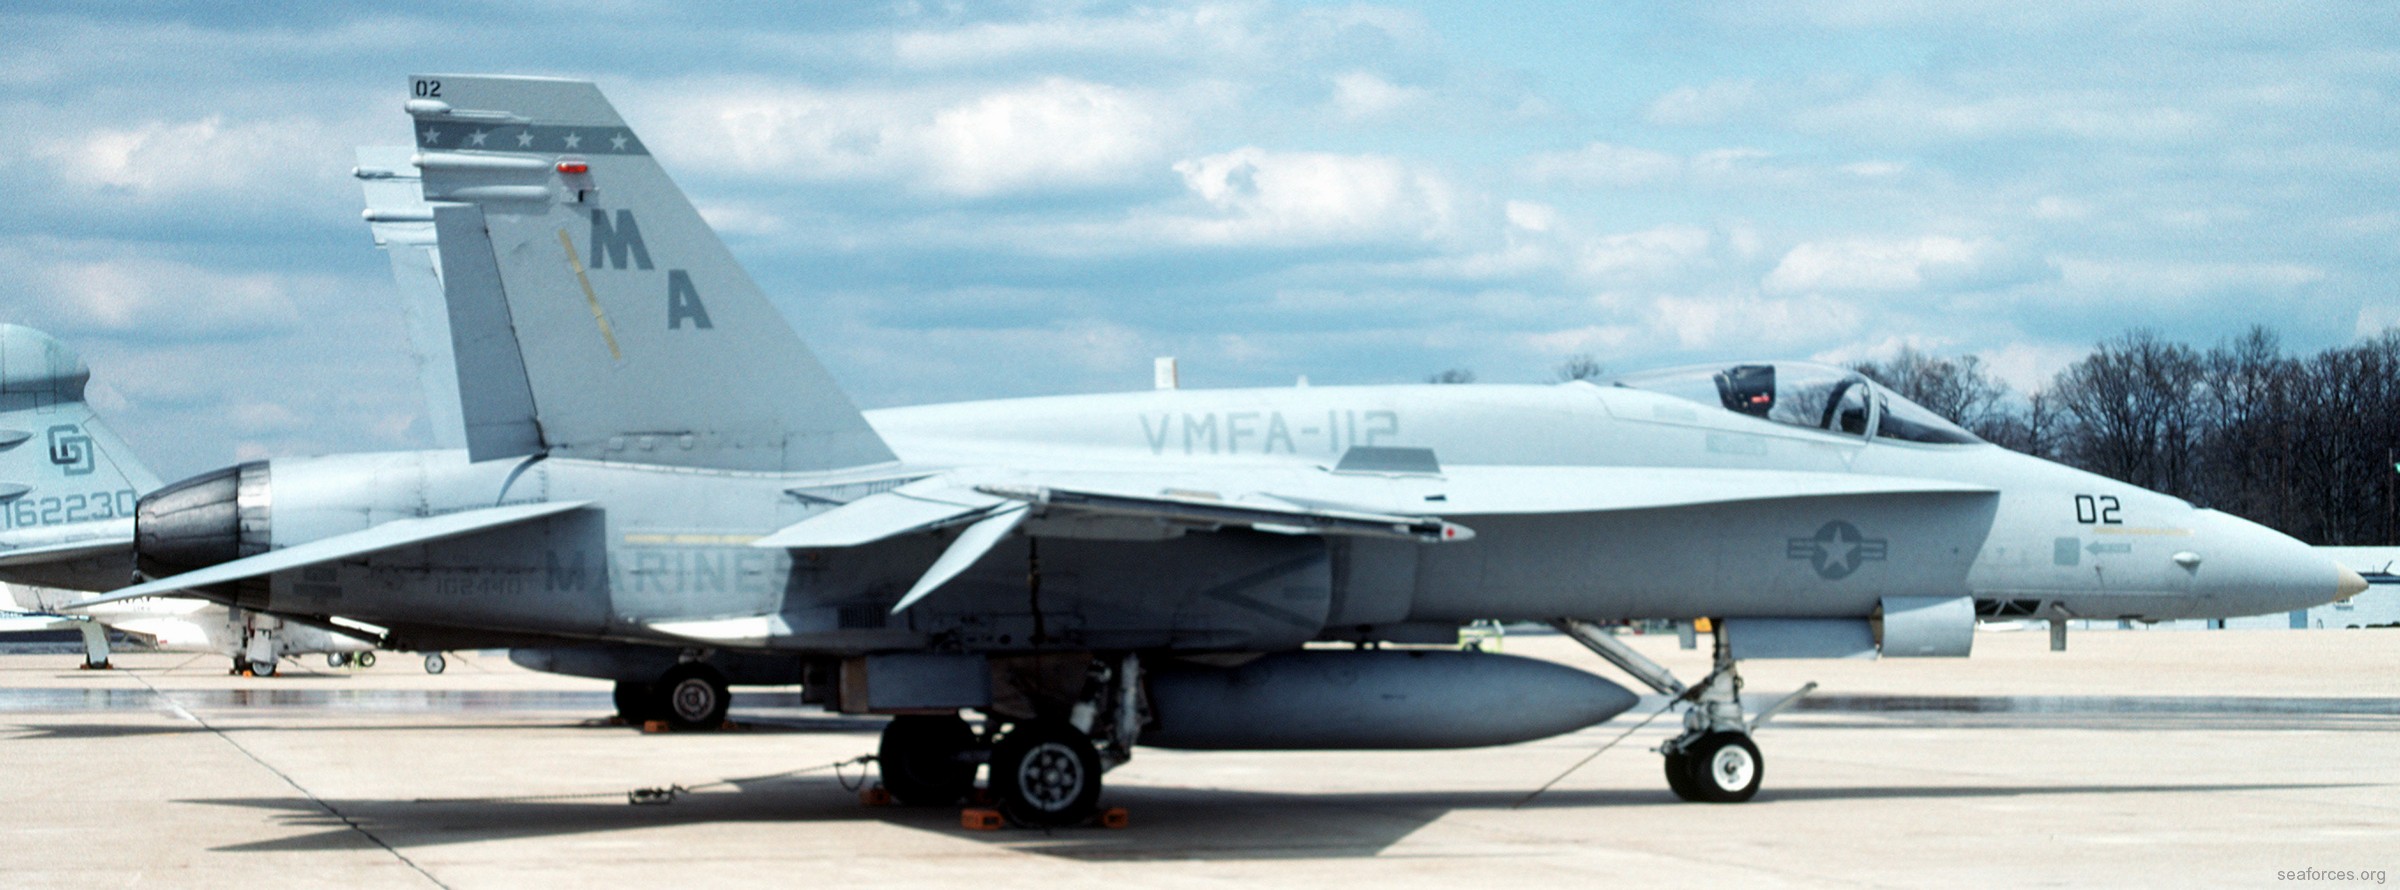 vmfa-112 cowboys marine fighter attack squadron f/a-18a+ hornet 46 andrews naf maryland